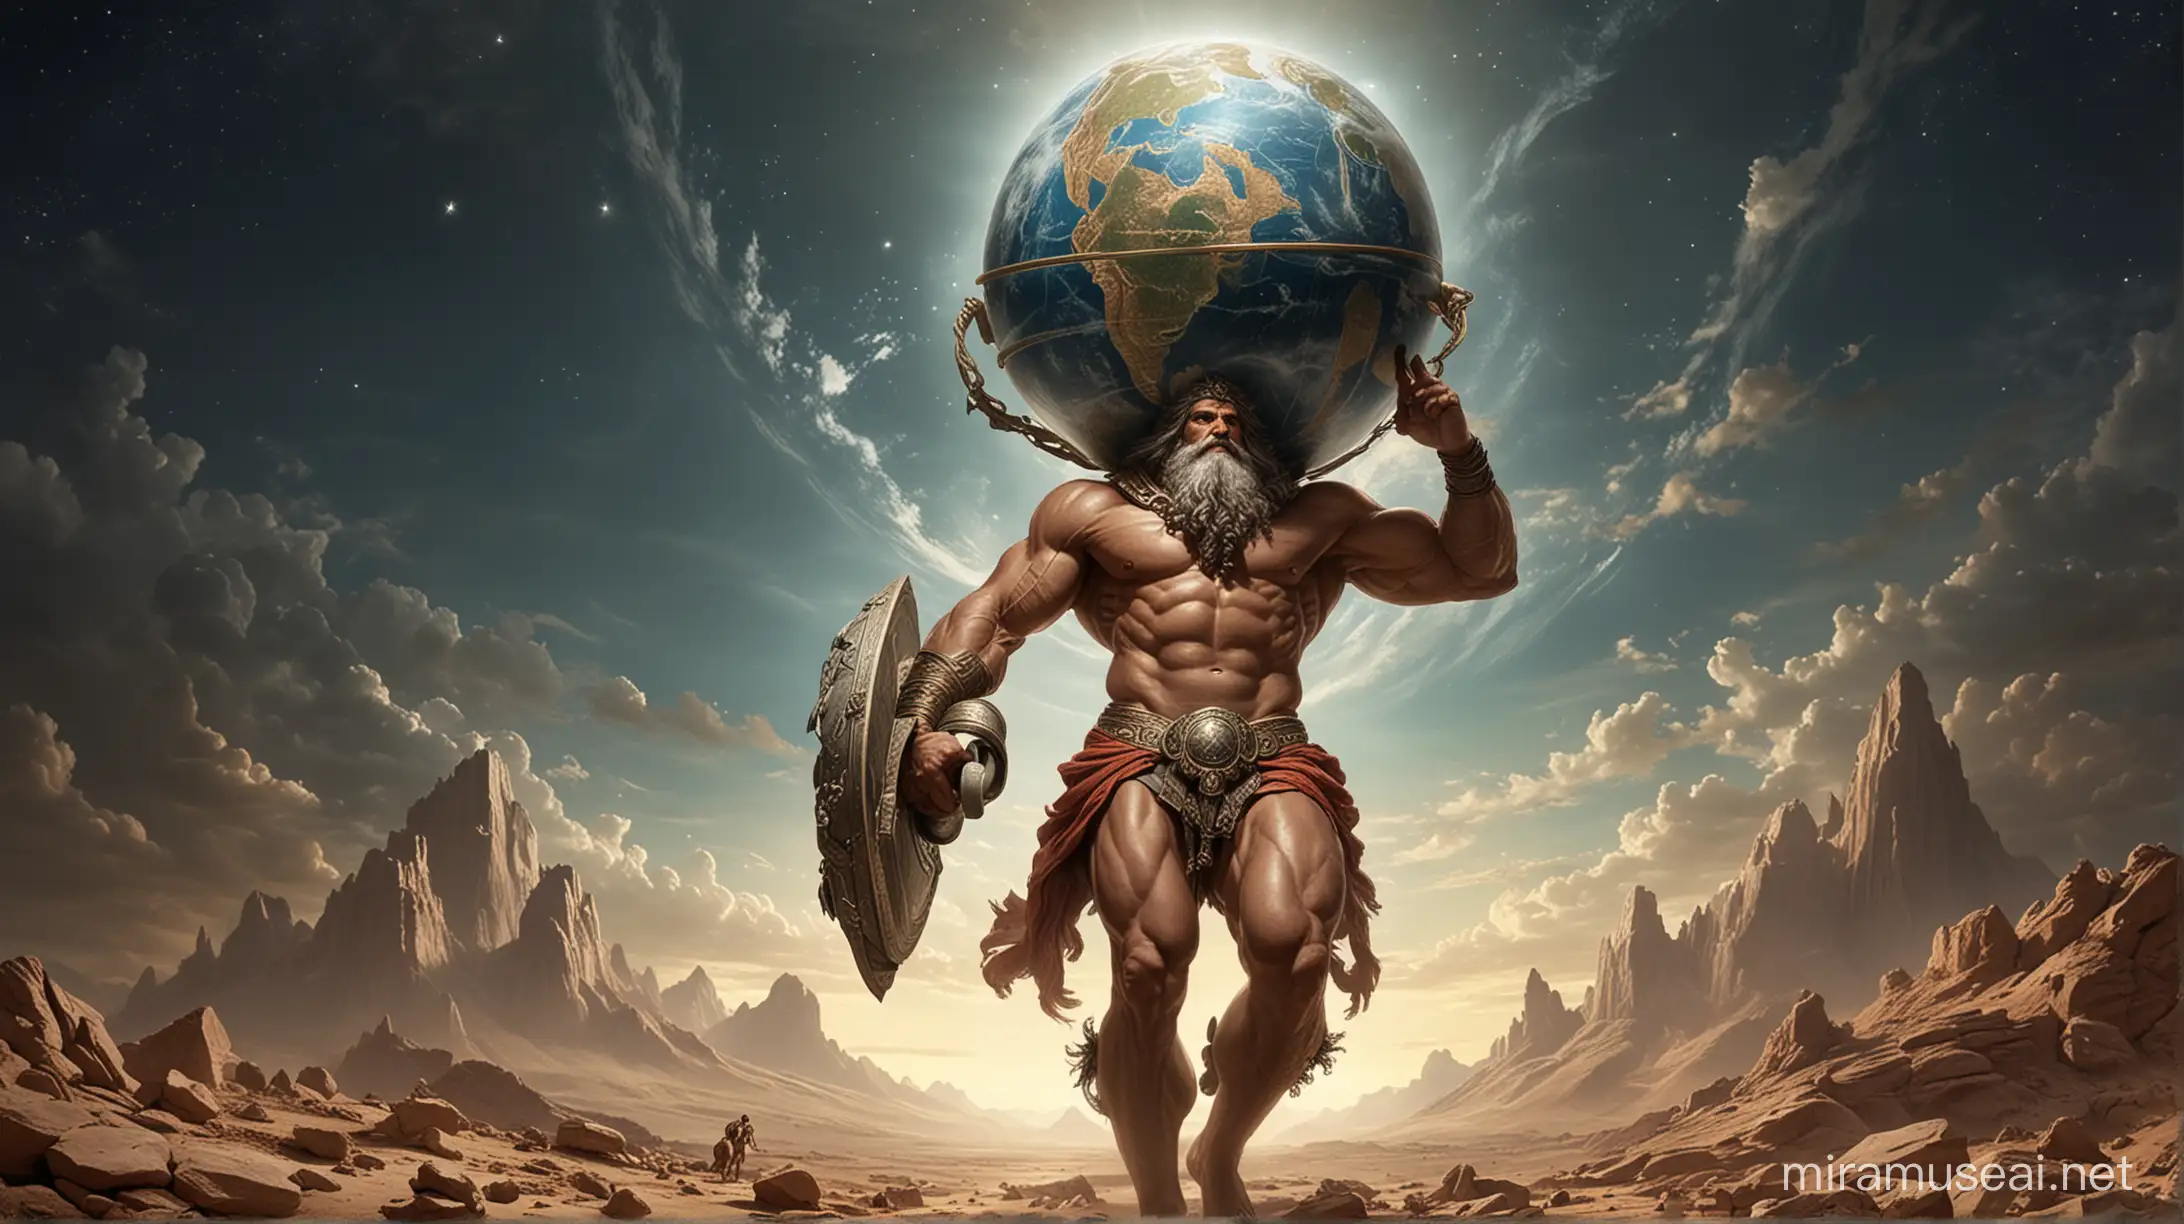 Majestic God Atlas Bearing the Weight of the World